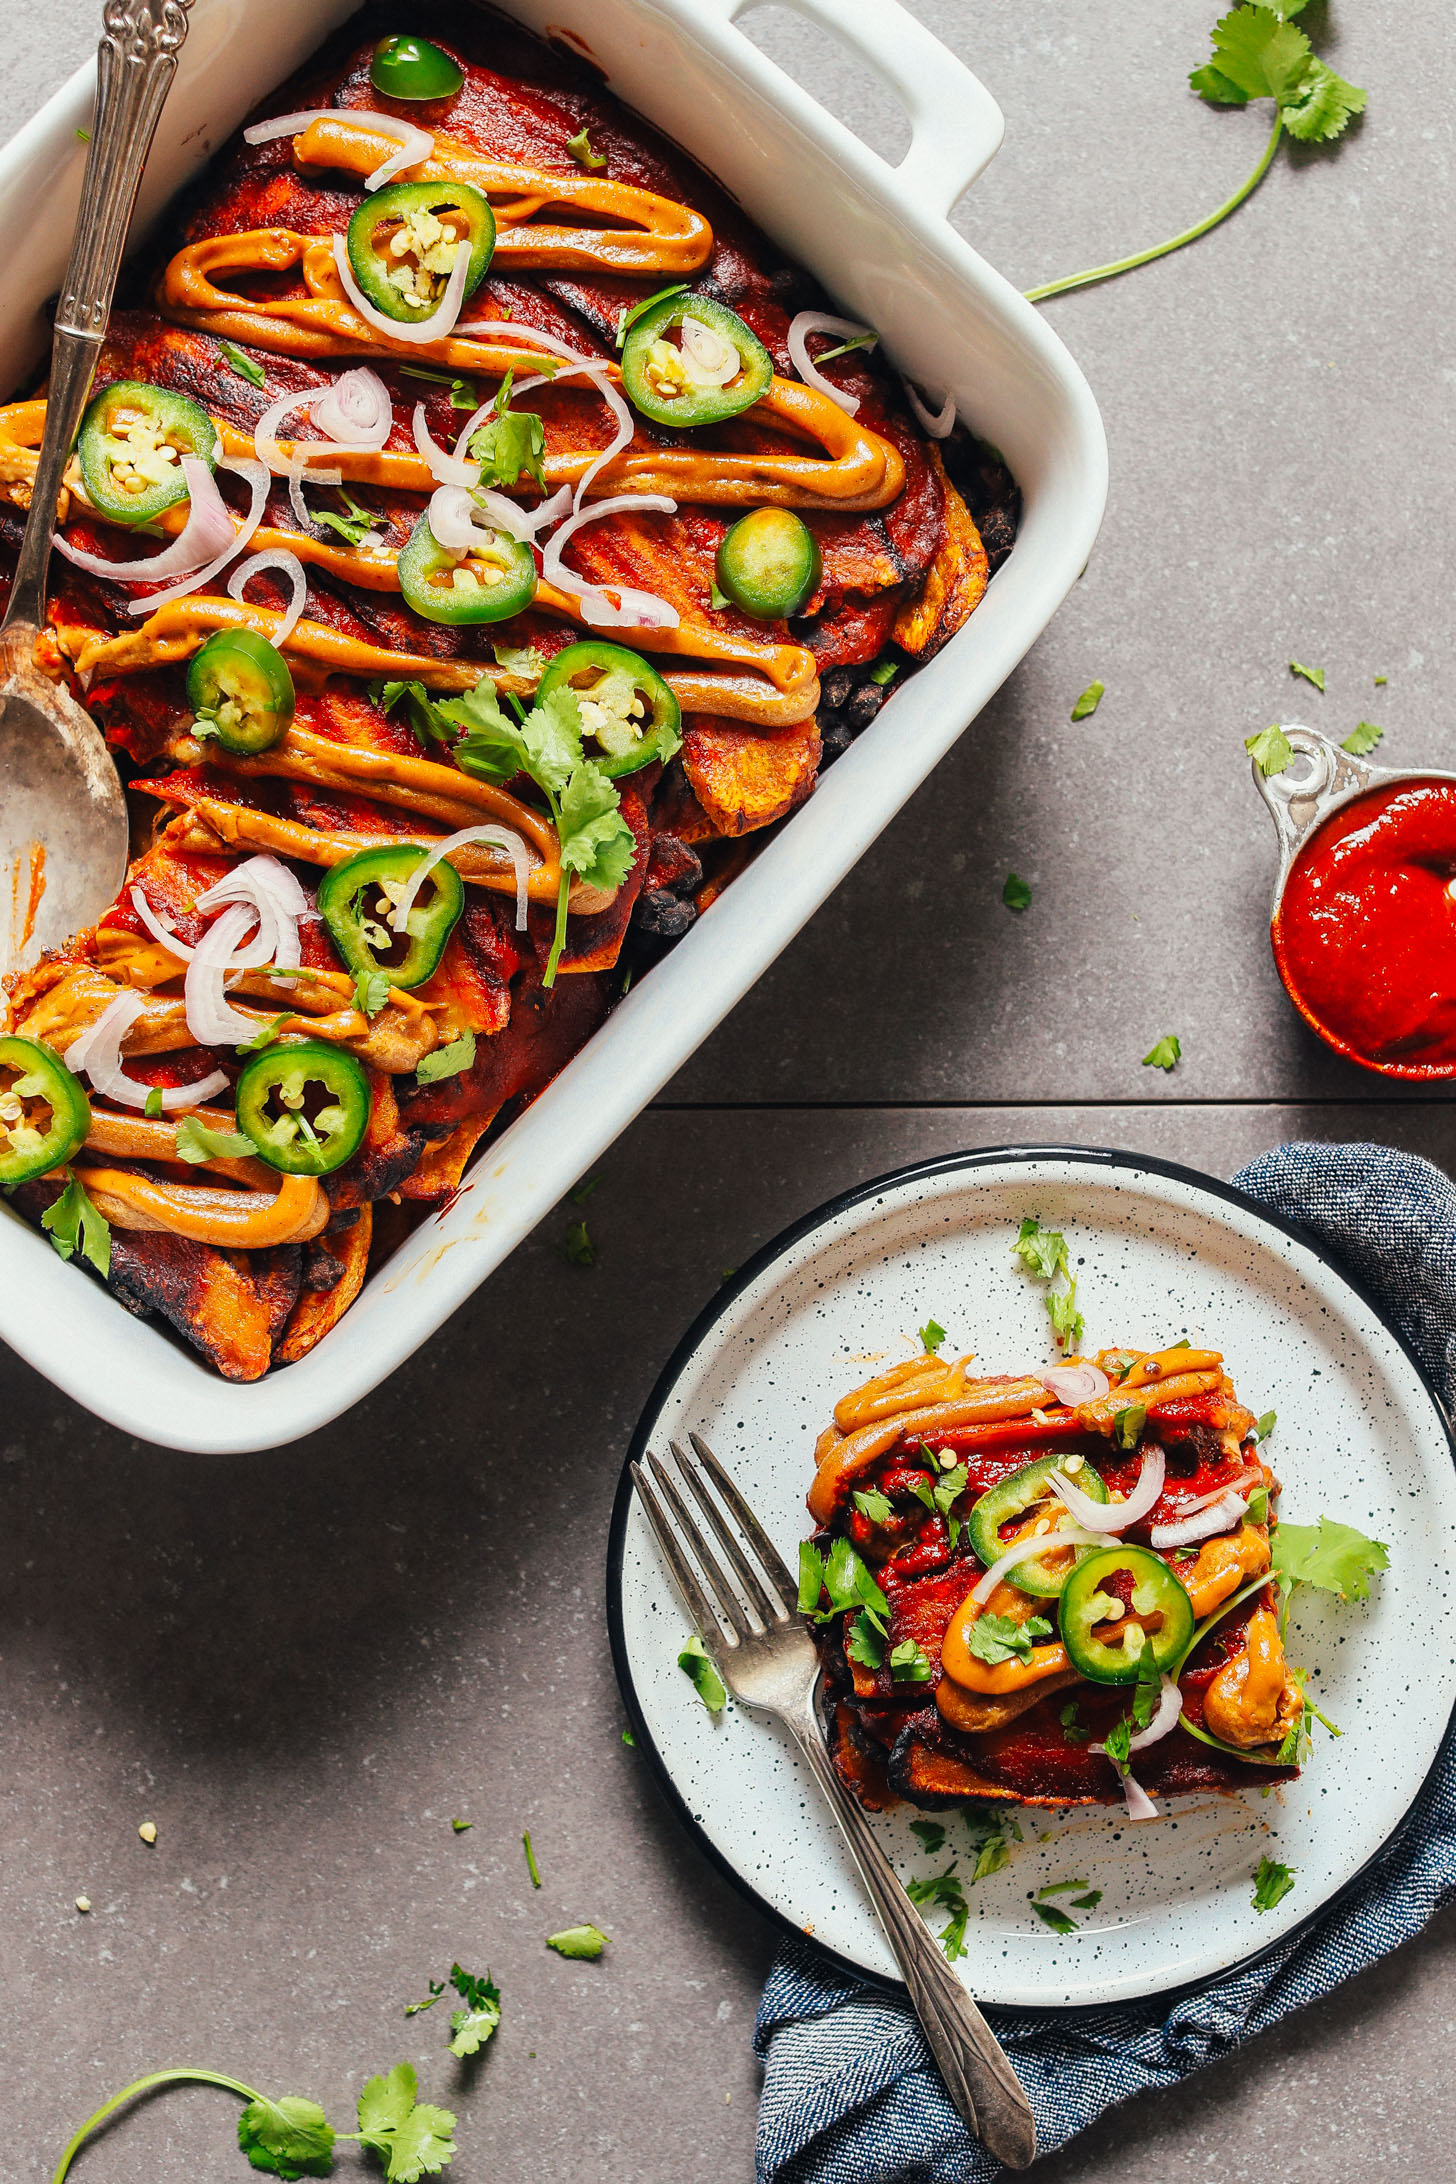 Baking dish and plate filled with our incredible Plantain Black Bean Enchilada Bake recipe